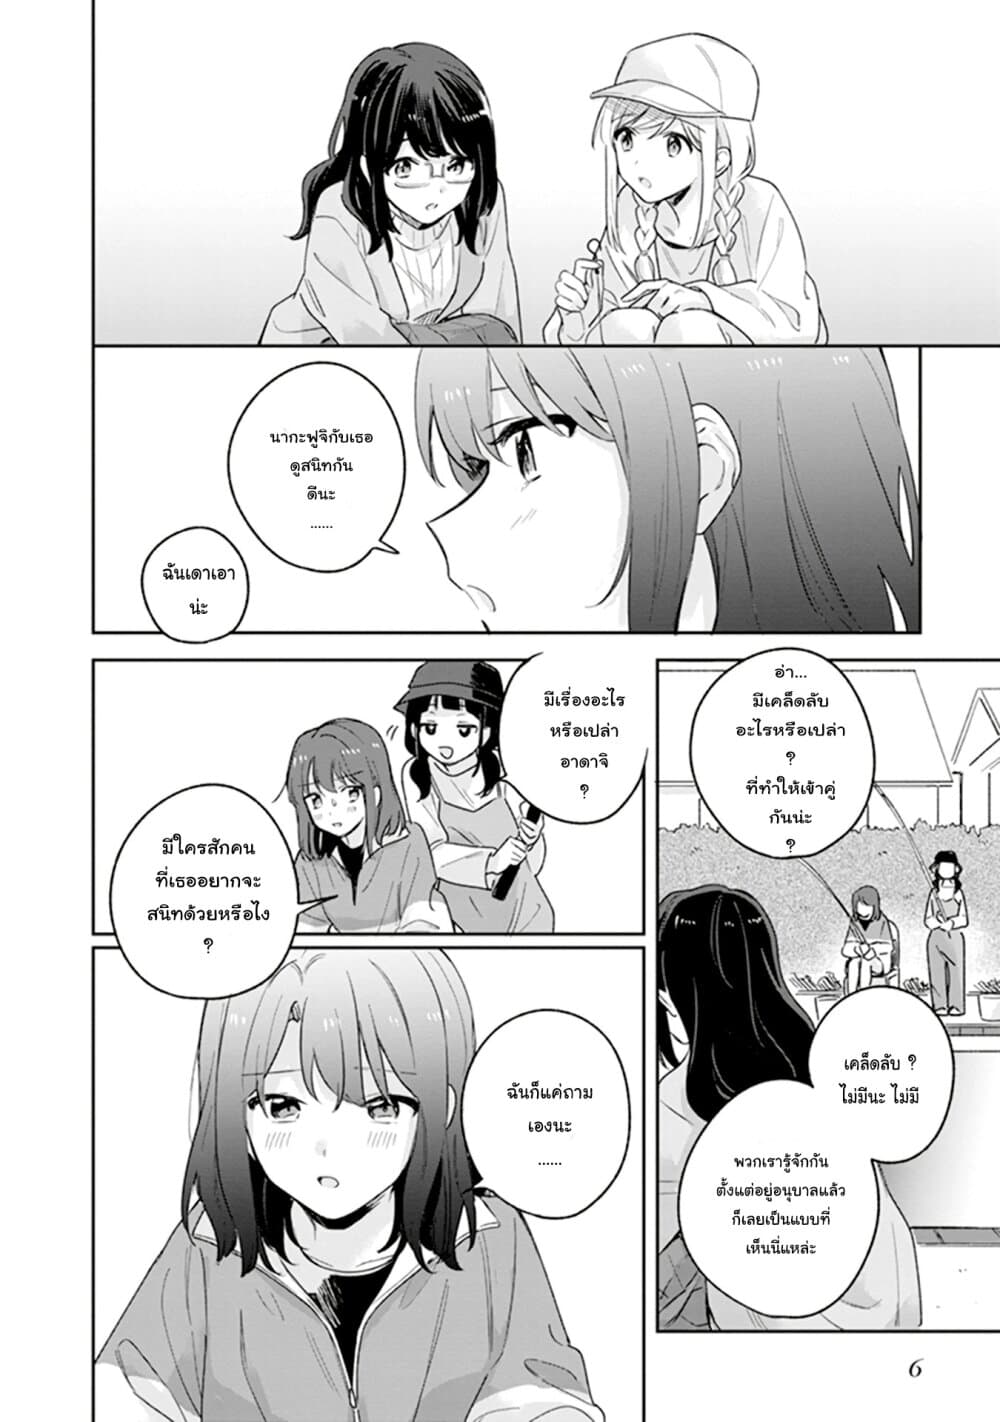 Adachi-to-Shimamura-Official-Comic-Anthology-Chapter1-8.jpg